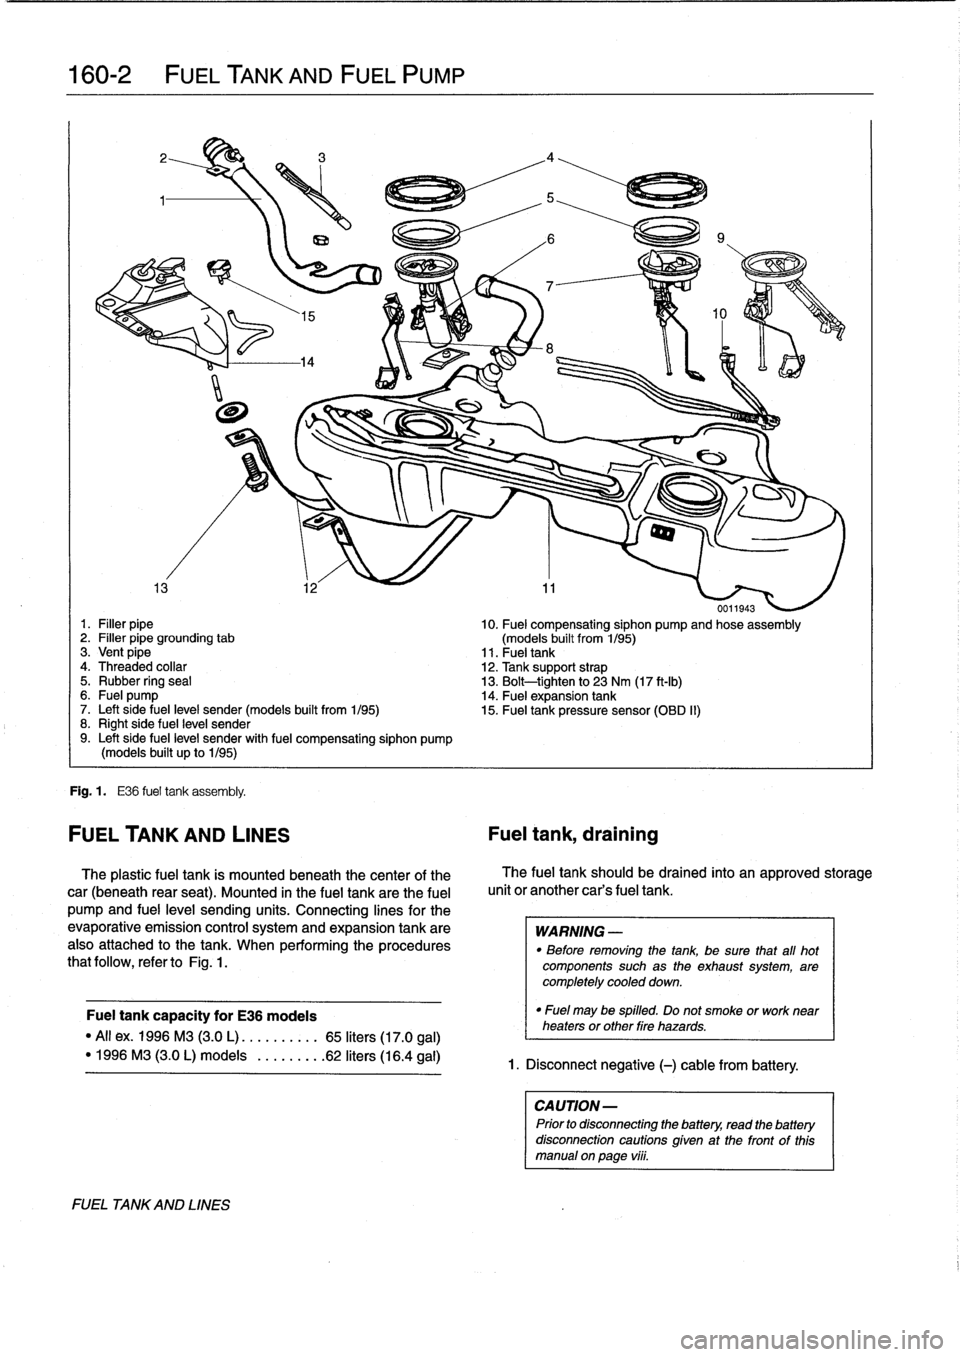 BMW M3 1996 E36 Workshop Manual 
160-2

	

FUEL
TANK
AND
FUEL
PUMP

0011943
1
.
Filler
pipe

	

10
.
Fuel
compensating
siphon
pump
and
hose
assembly
2
.
Filler
pipe
grounding
tab

	

(models
built
from
1/95)
3
.
Vent
pipe

	

11
.
F